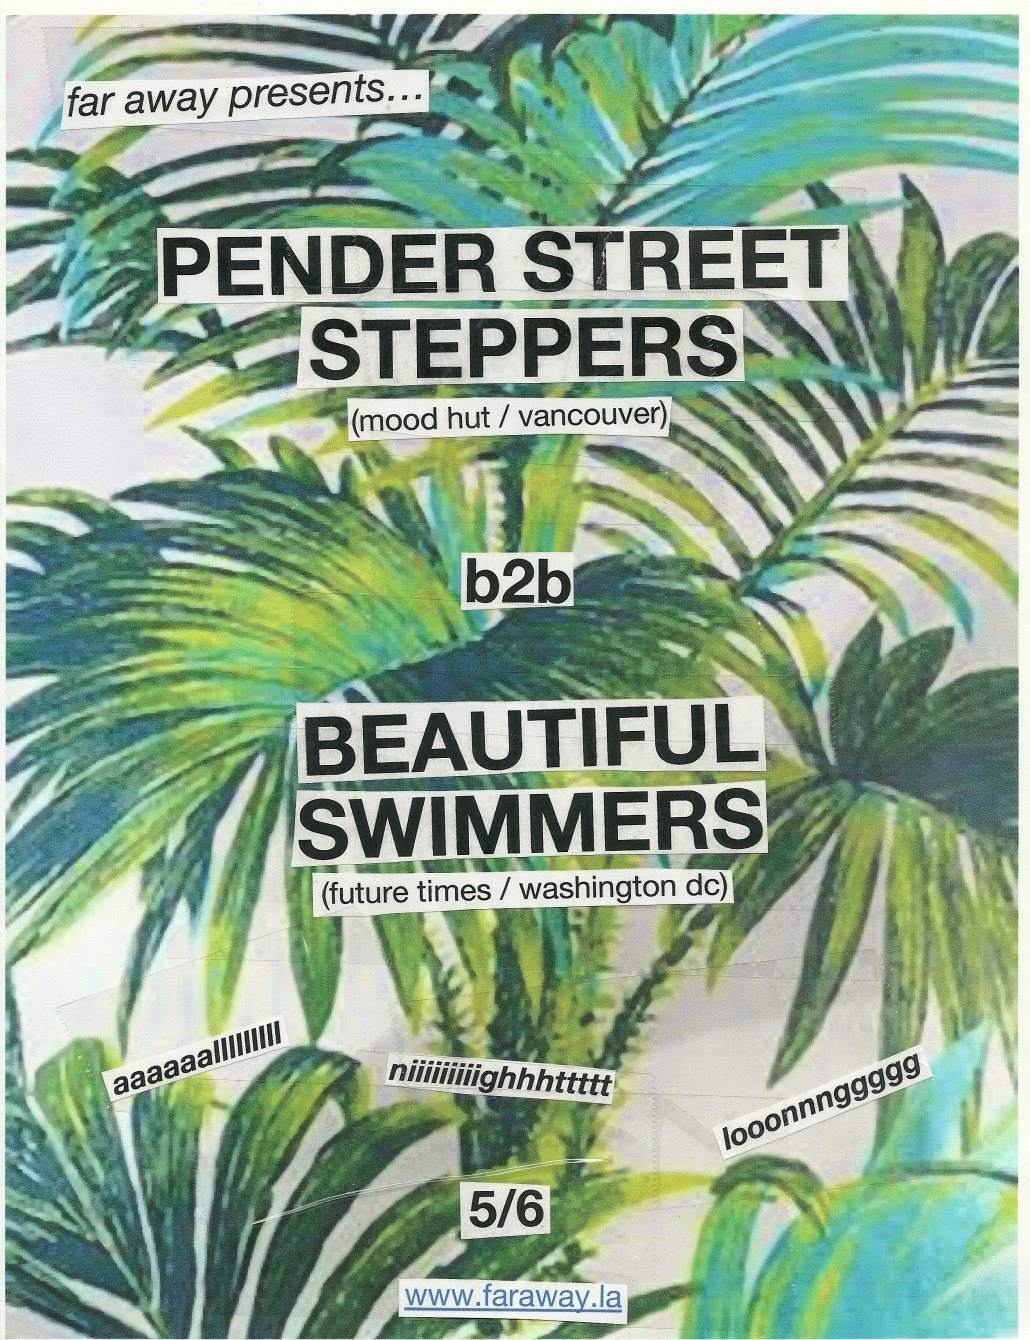 Far Away presents Pender Street Steppers vs Beautiful Swimmers - Página frontal